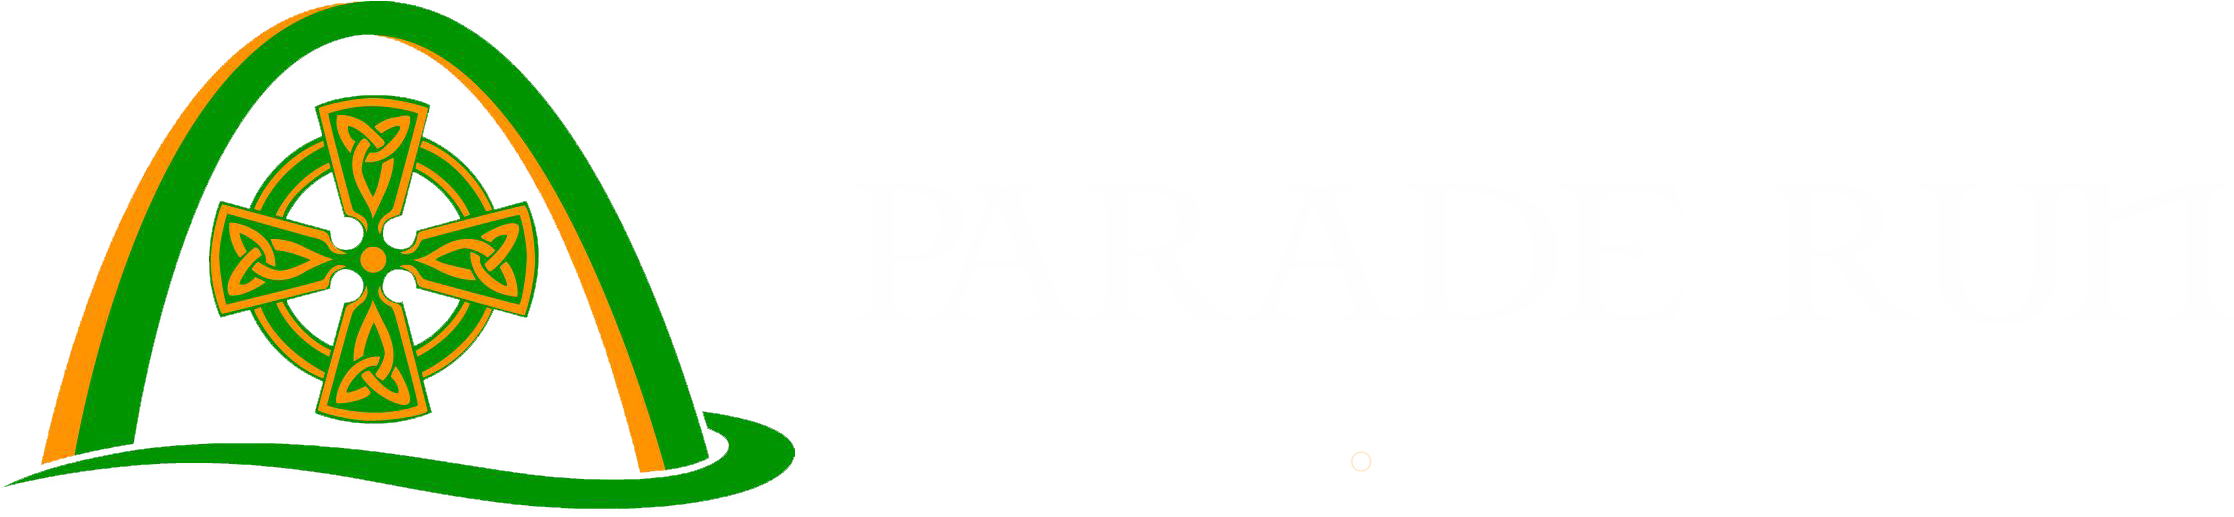 The 41st Annual St Patrick's Day Parade Run Will Take - The 41st Annual St Patrick's Day Parade Run Will Take (2233x600)